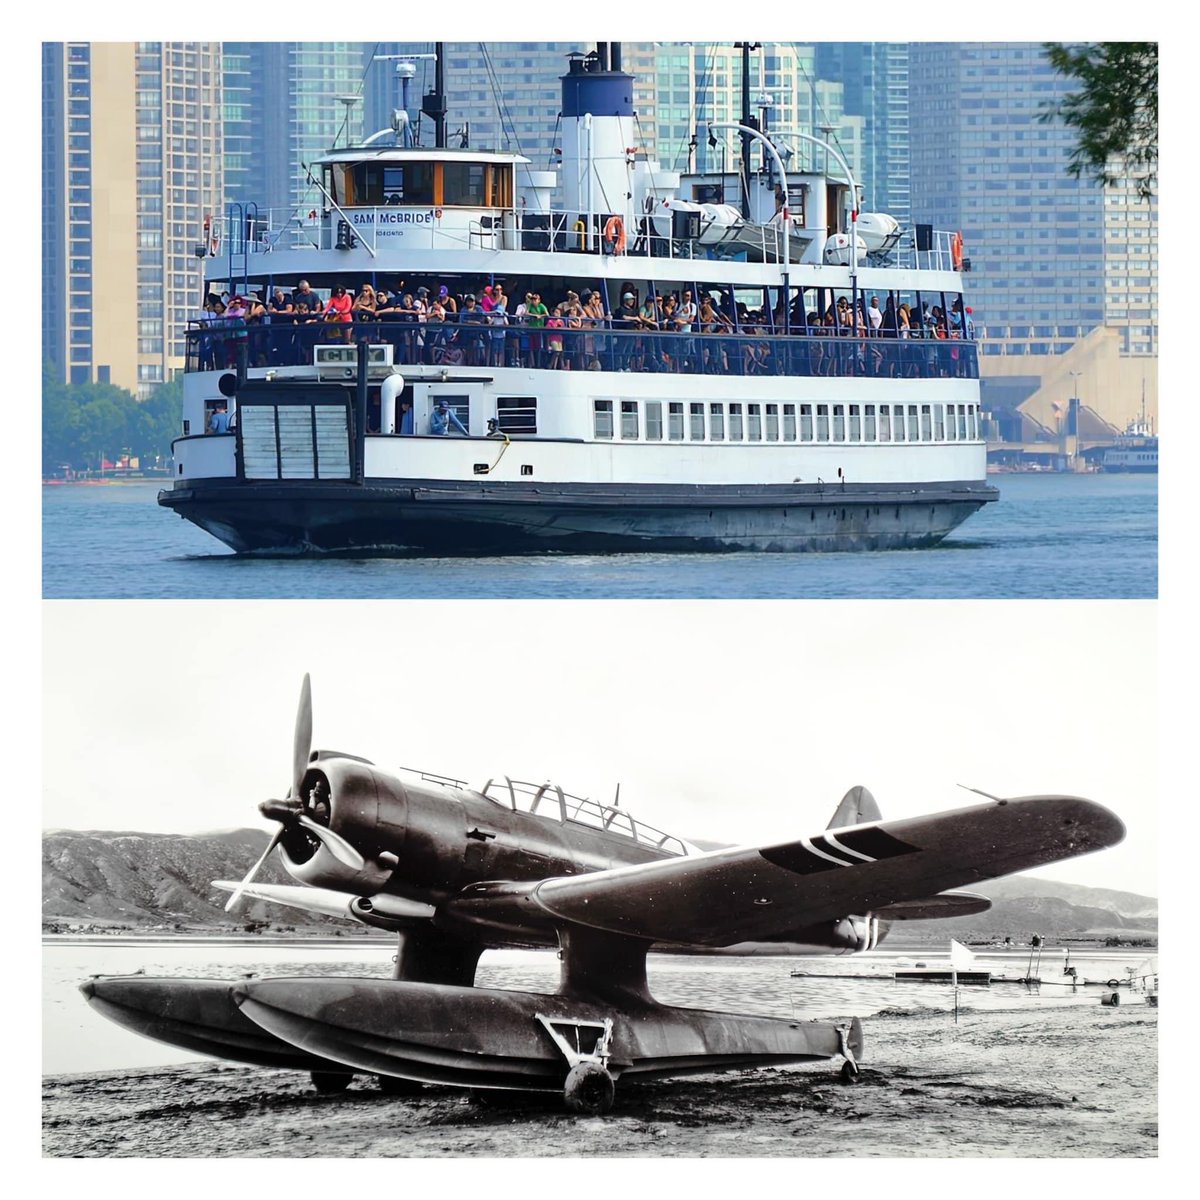 The Toronto ferry, Sam Mcbride, commenced service in 1939. In June, 1941 a Norwegian Northrop N-3PB plane crashed into the top deck of the ferry, killing both Norwegian Air Force pilots. At the time the Norwegian Air Force was based in Toronto at Toronto Island Airport (cont)